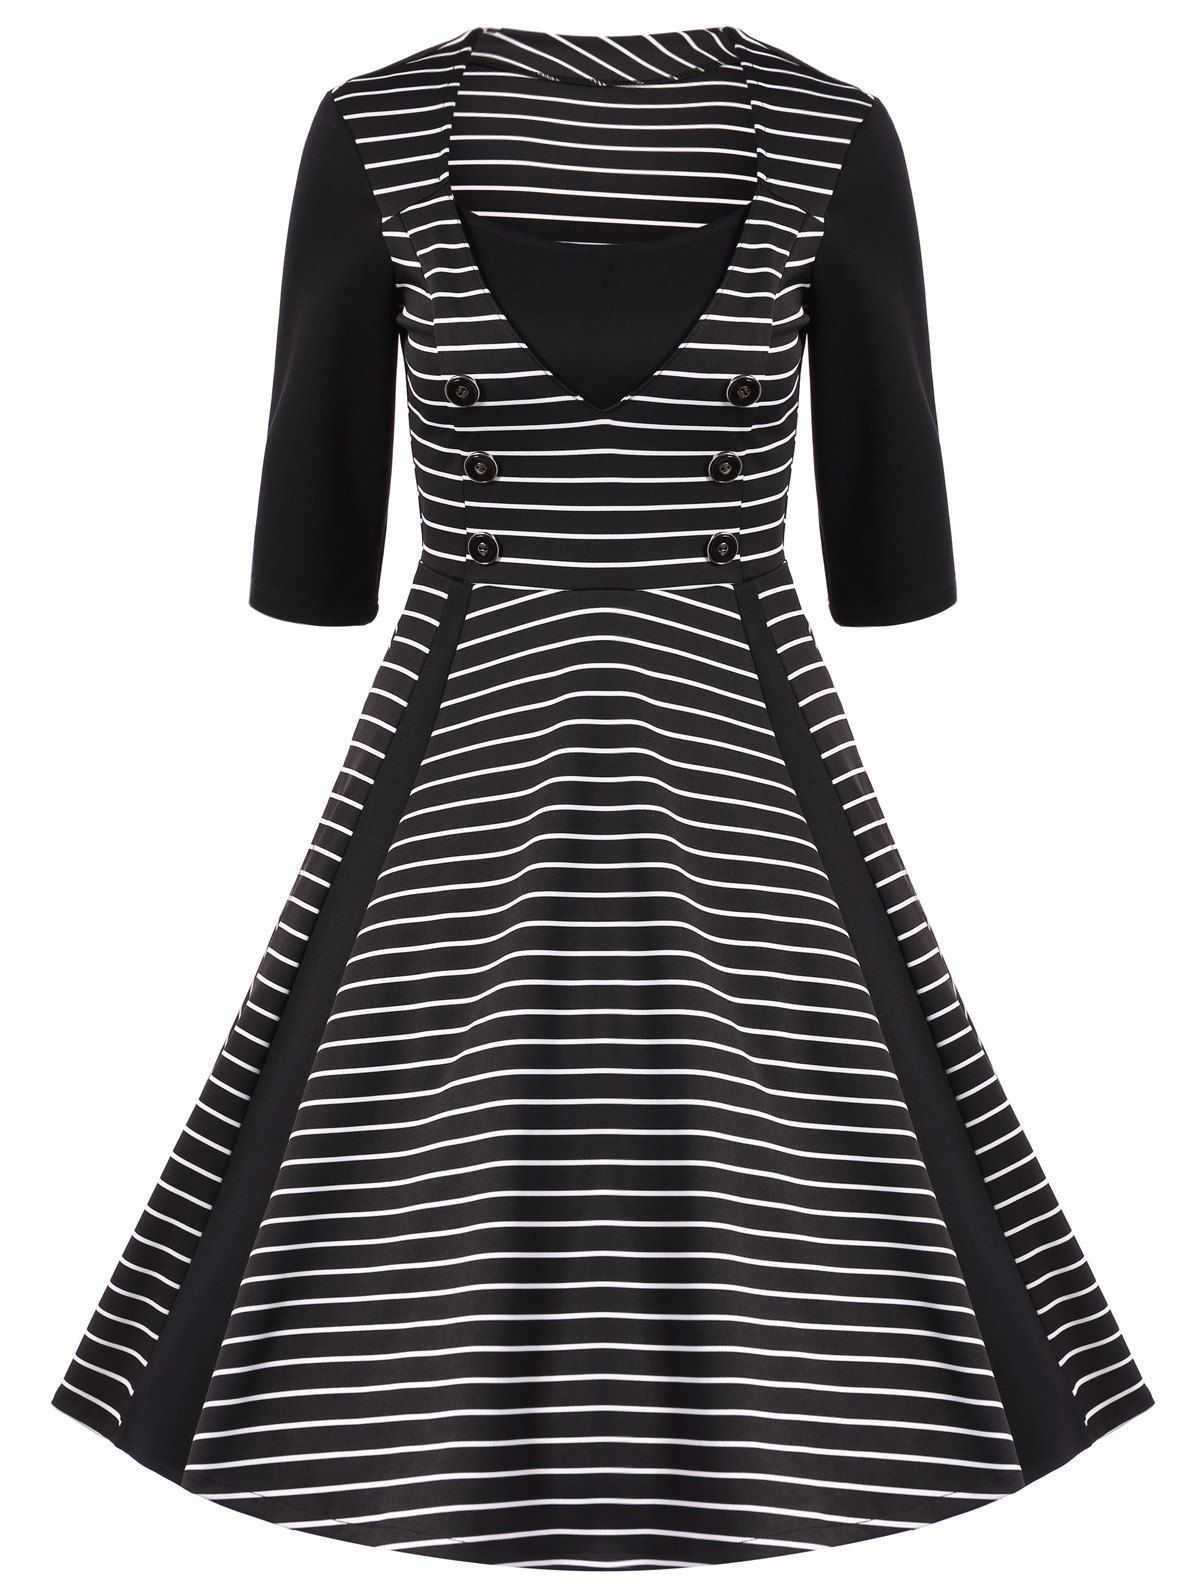 [17% OFF] 2021 Stripe Buttoned Fit And Flare Dress In BLACK | DressLily